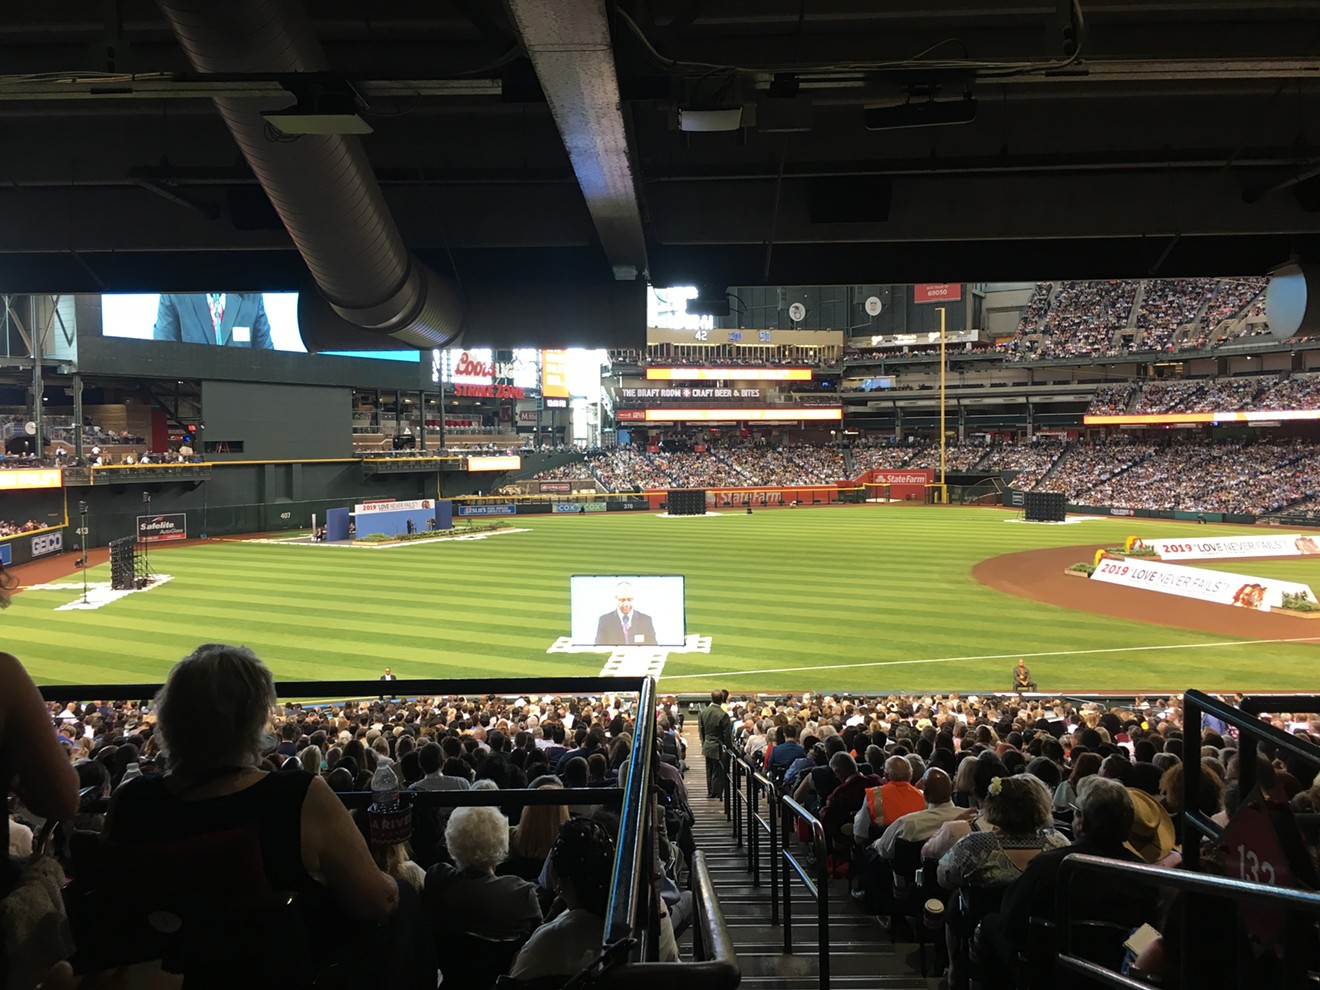 40,000 Jehovah's Witnesses fill the seats of Chase Field on Friday, August 9, 2019, the first day of an international convention.